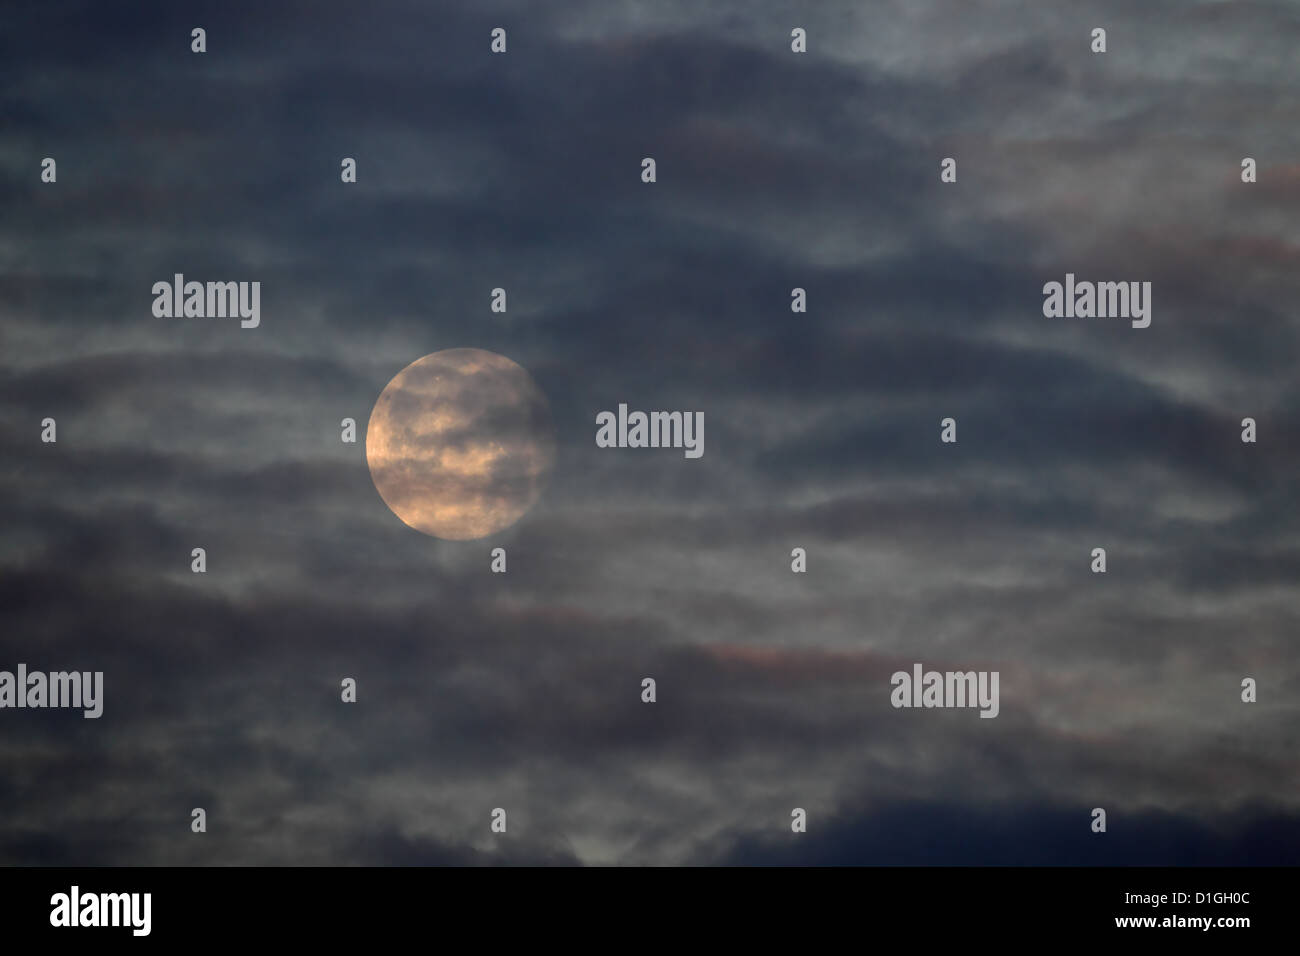 Moon partially obscured by cloud Stock Photo